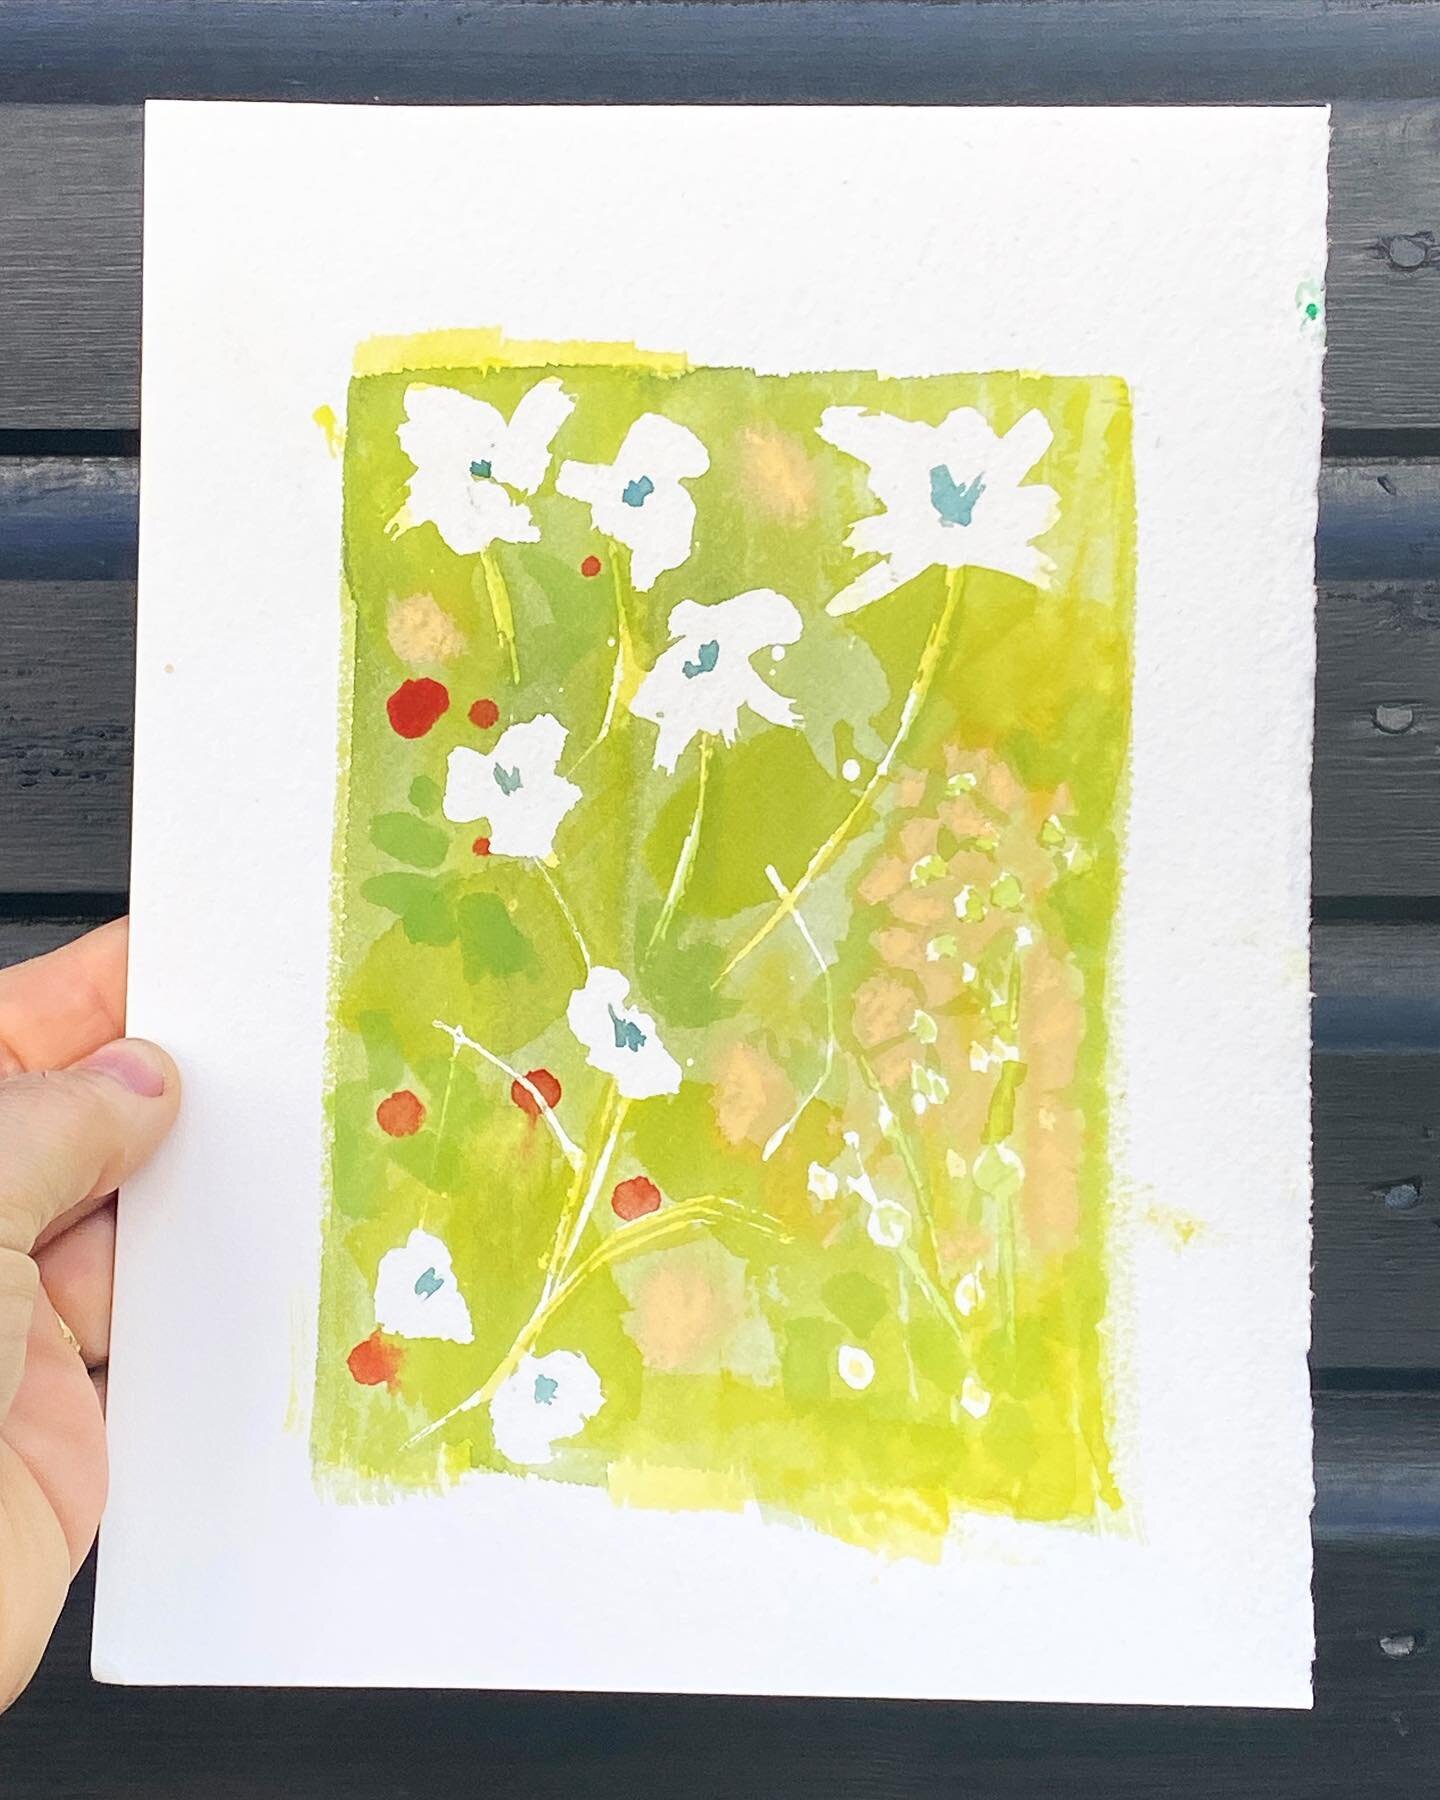 🍃 Some Watercolour/Gouache studies to sell at my Open Studio this weekend. Totally inspired by the glorious green growth we are surrounded by now that spring has finally dug in! 
Last weekend I sold all (but one!) of my floral monoprints which has b